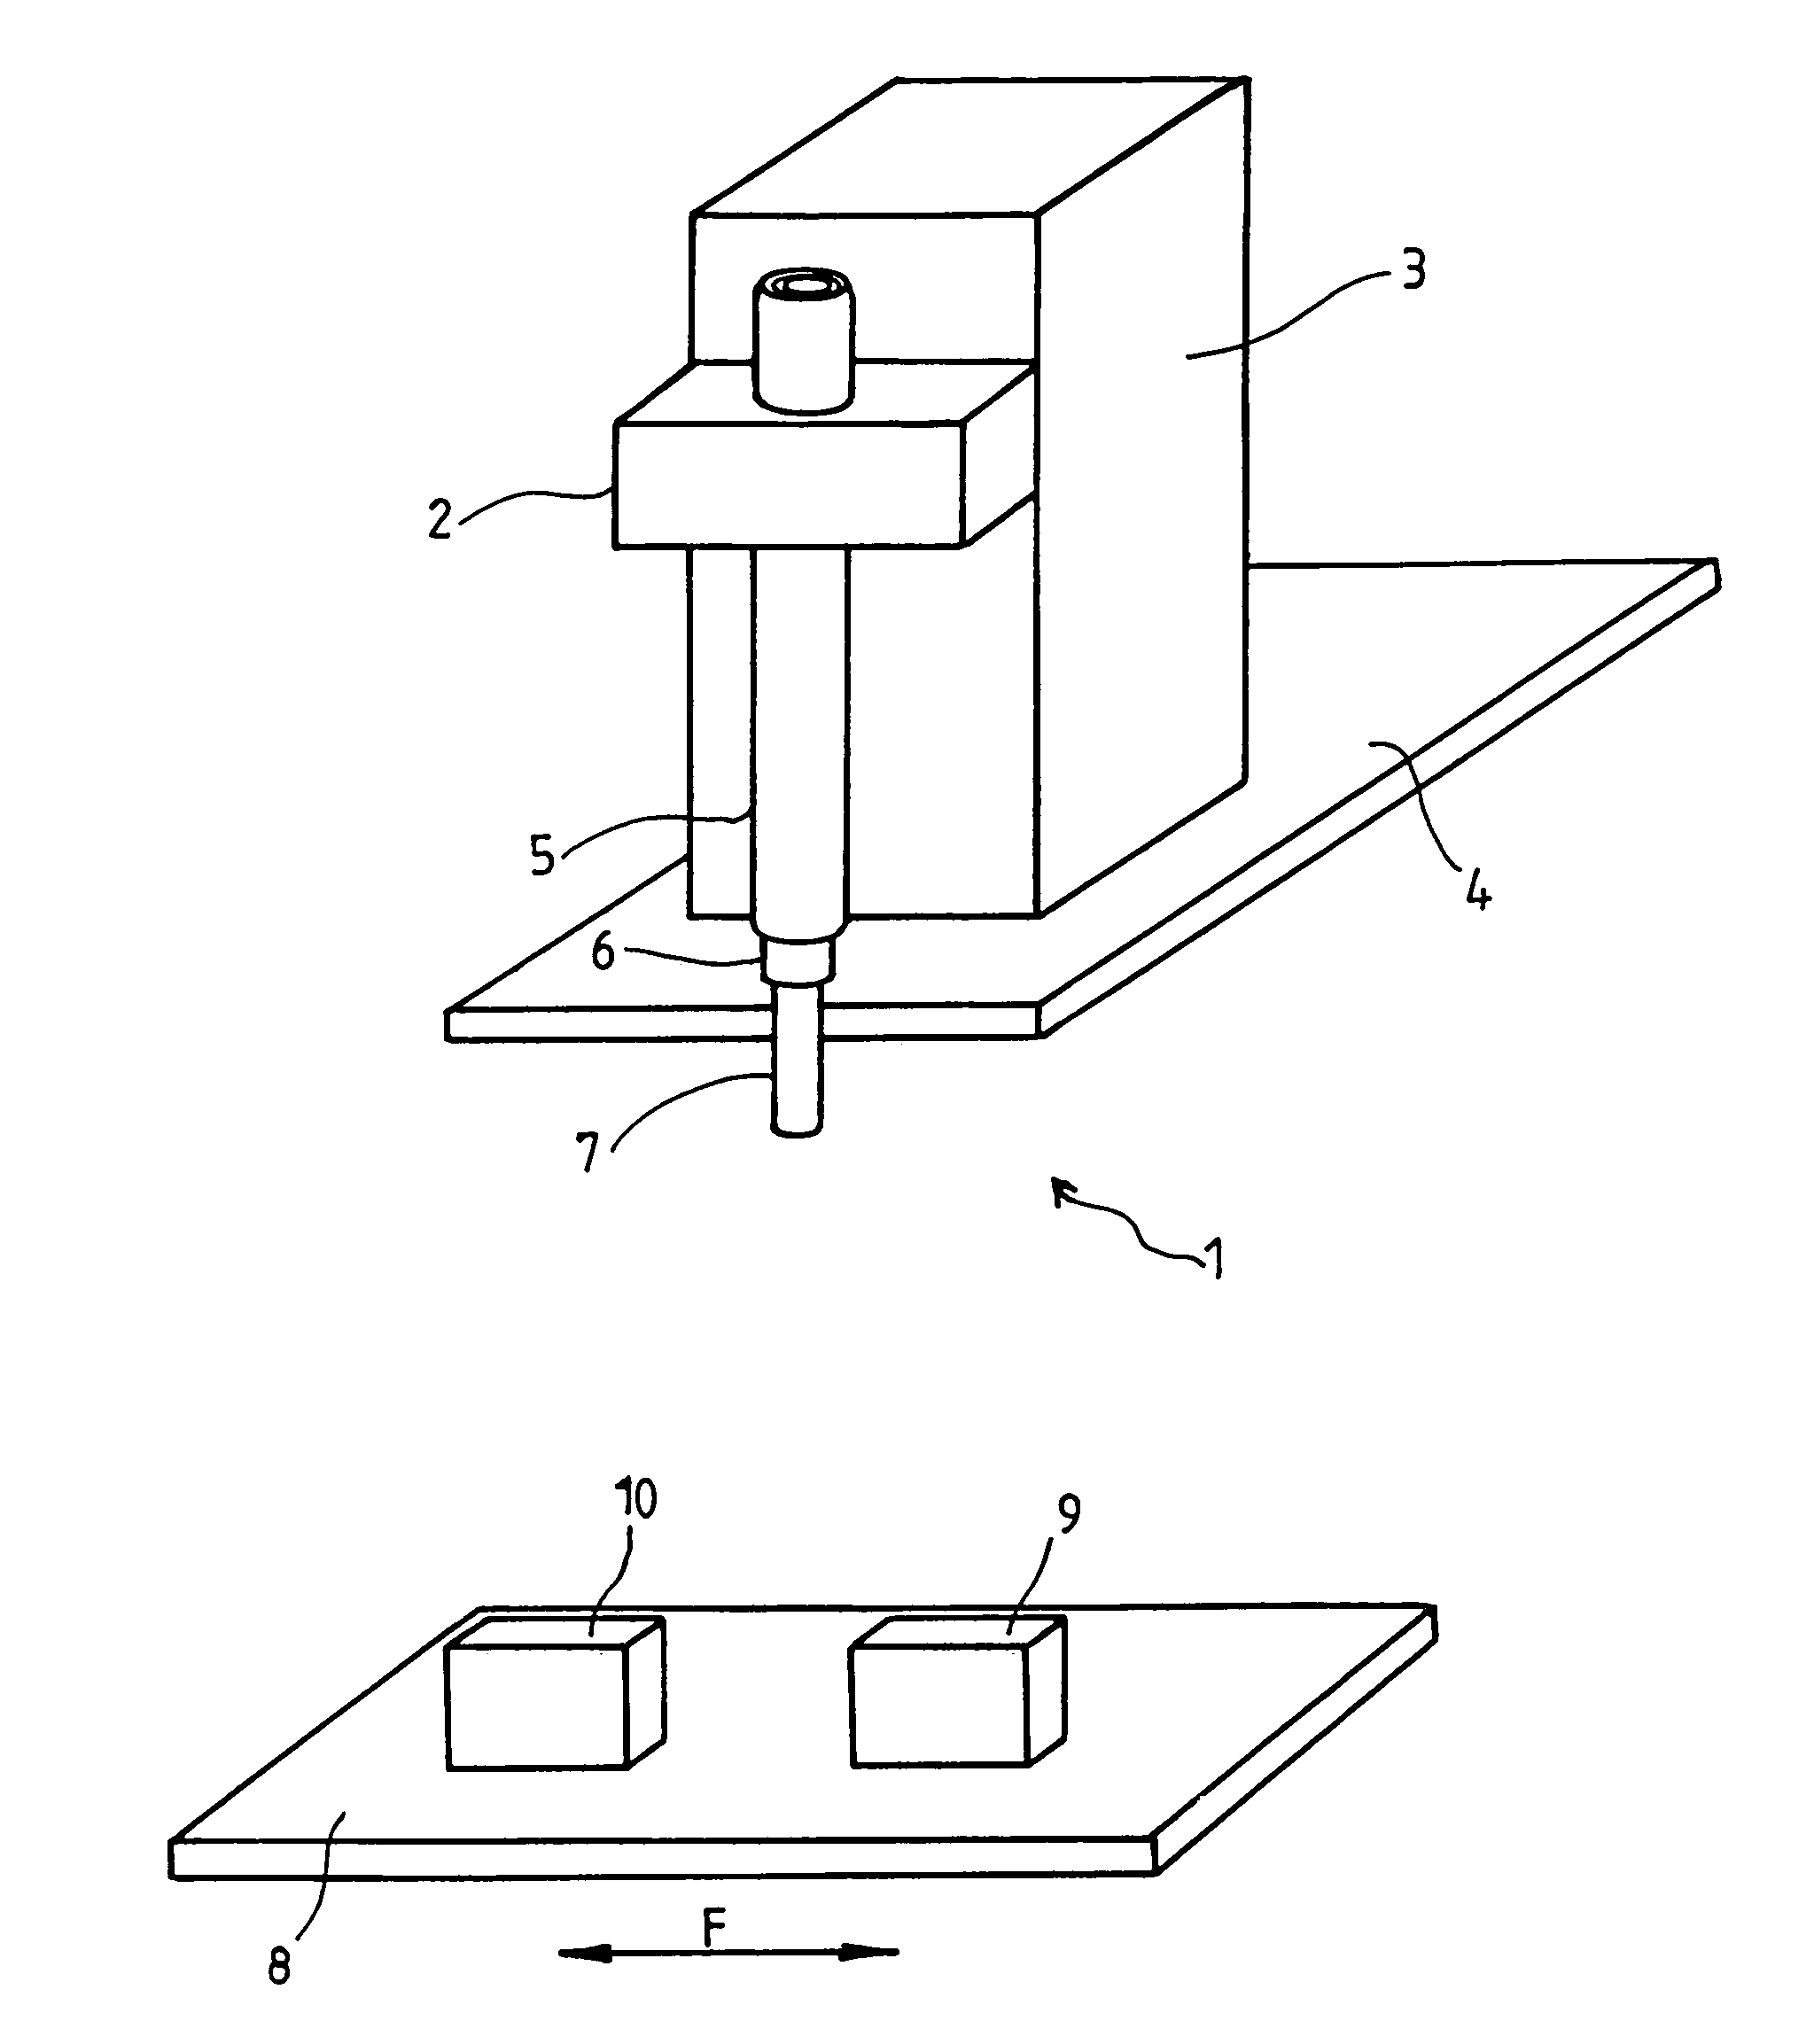 Core sampling device intended to assemble tissue arrays